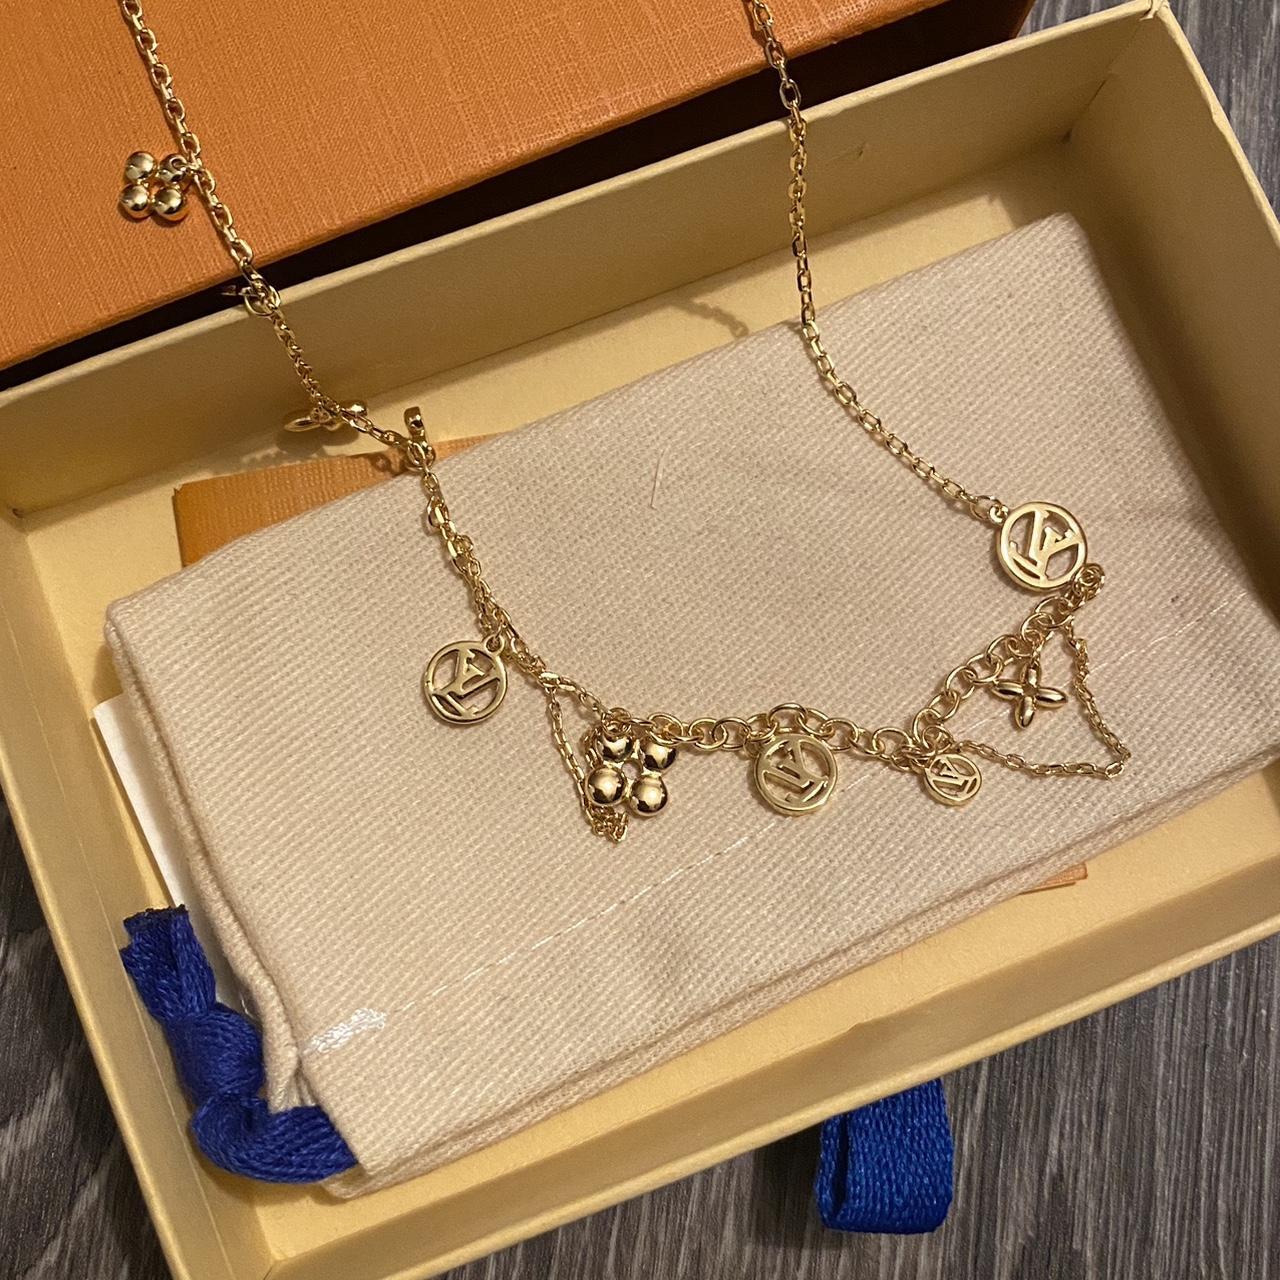 Louis Vuitton, Jewelry, Louis Vuitton Blooming Supple Necklace